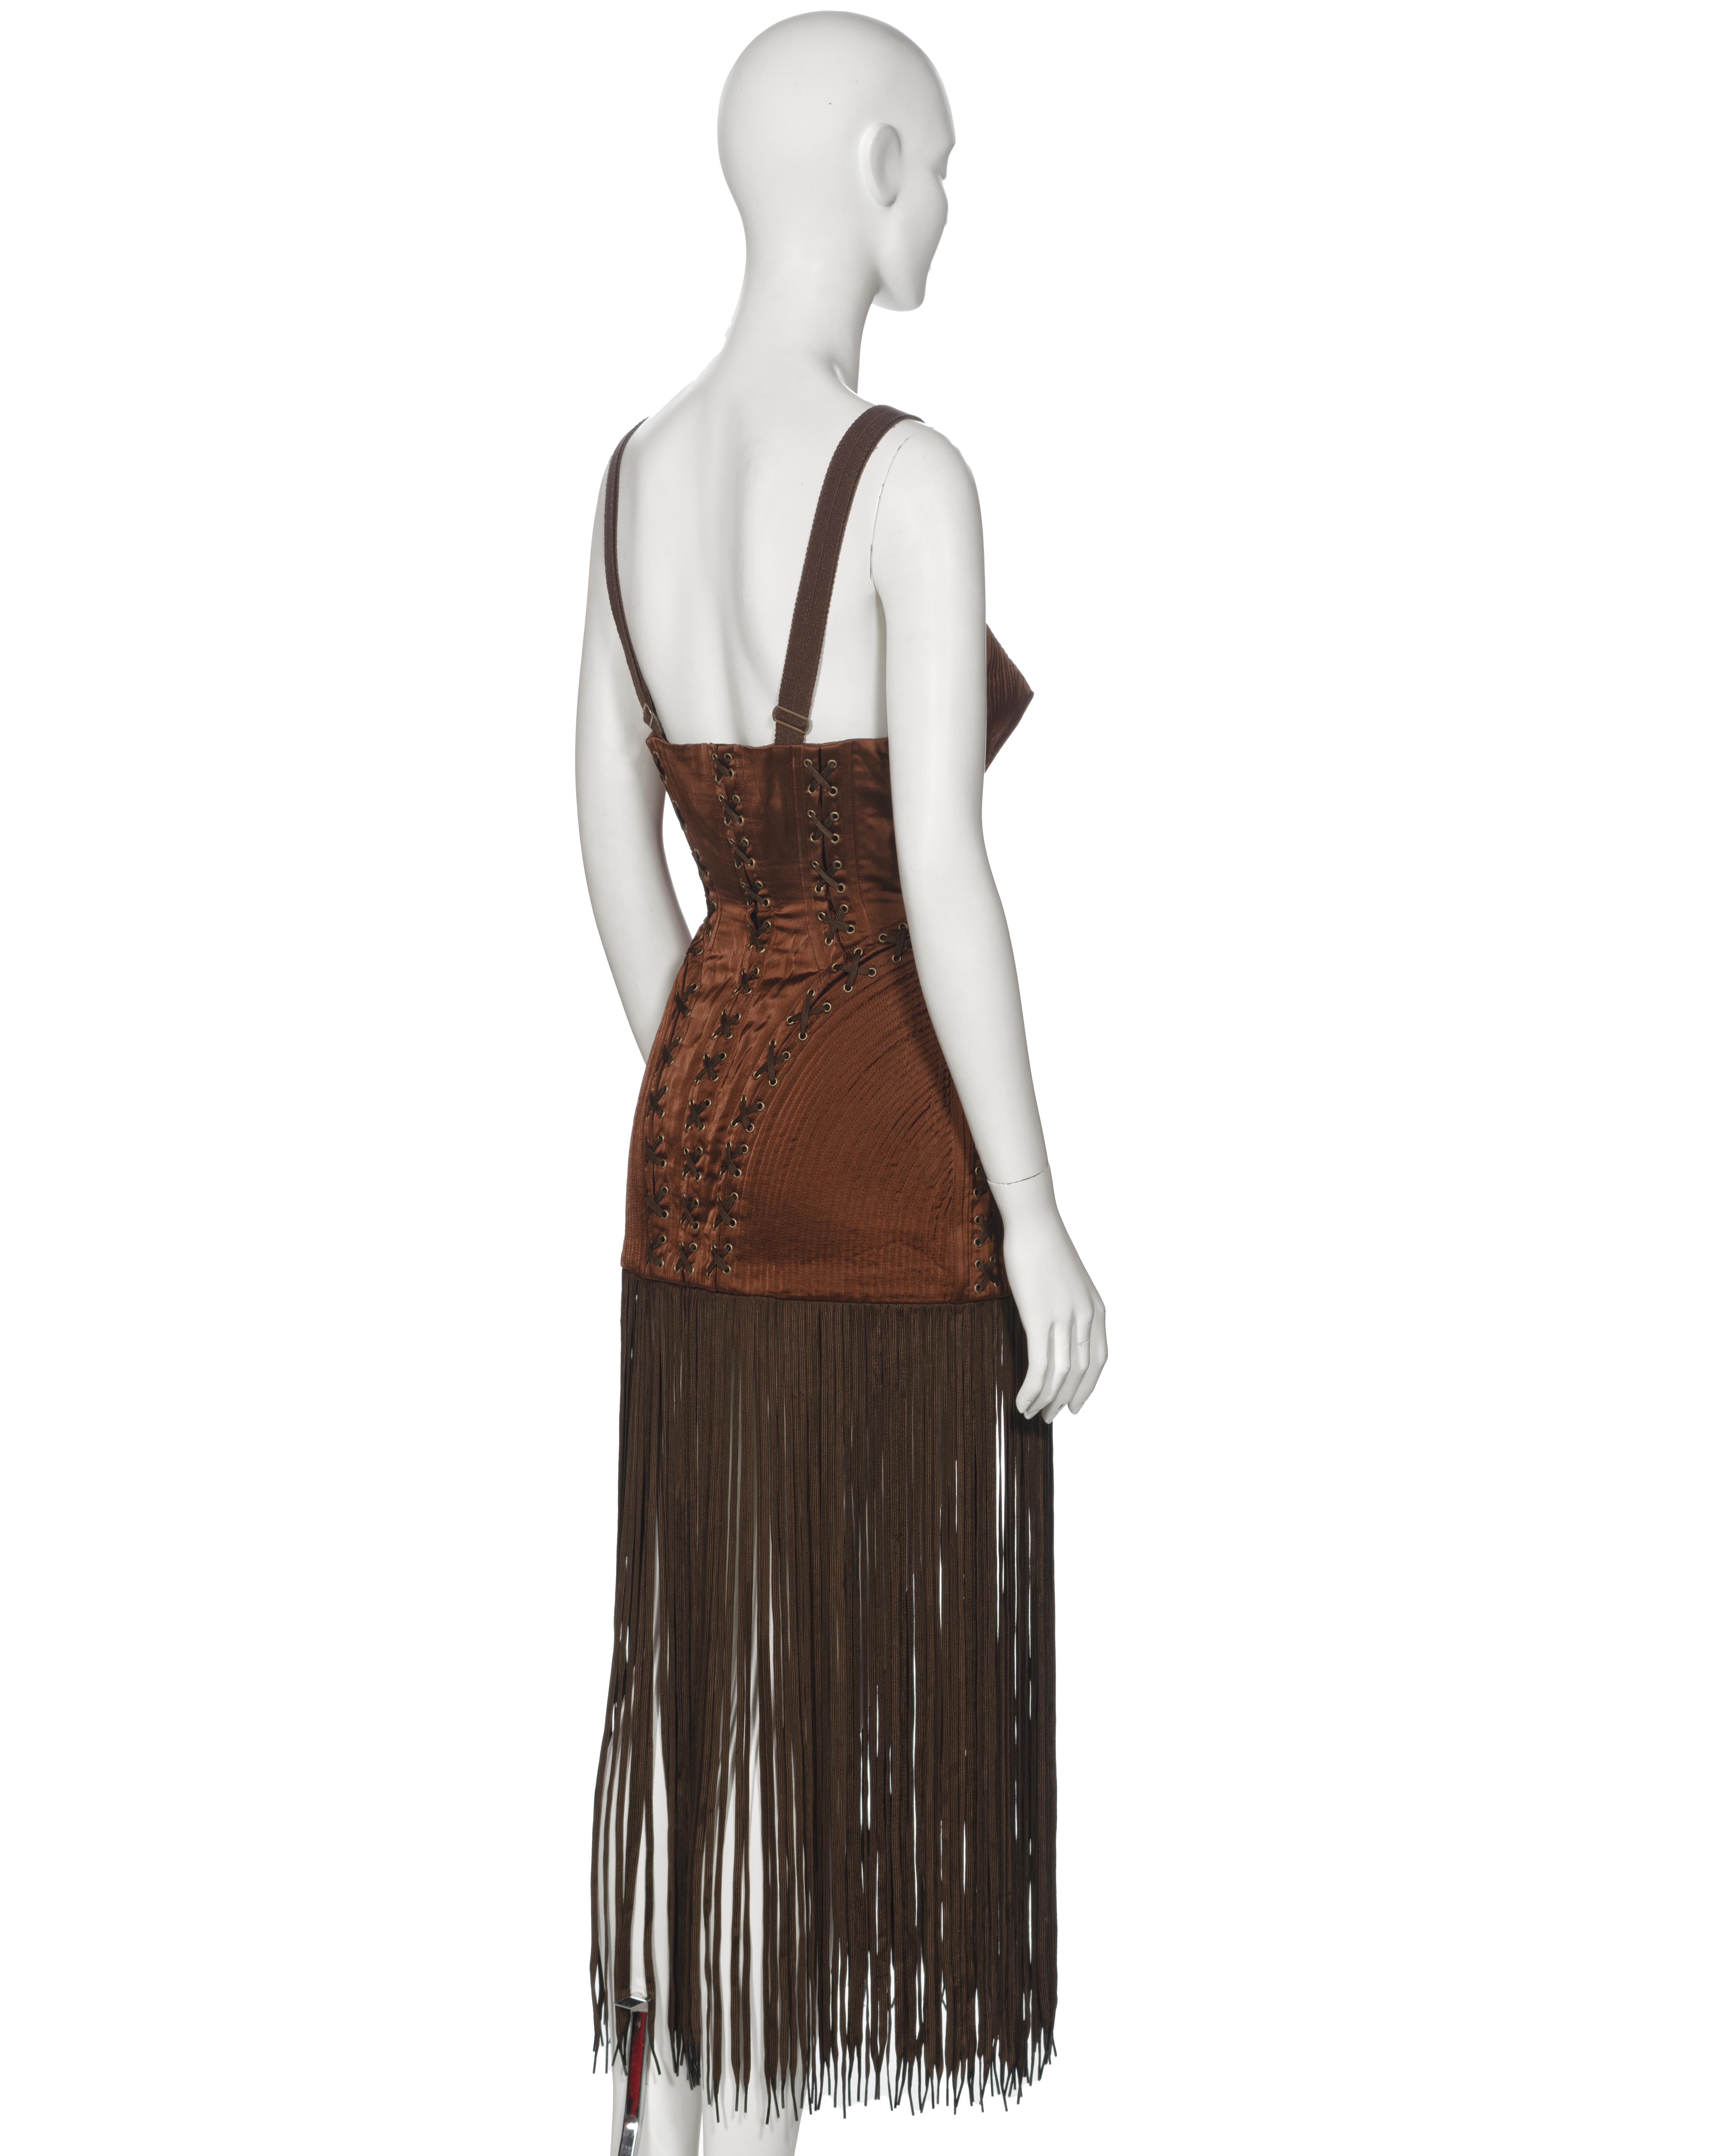 Jean Paul Gaultier Brown Corset Dress with Cone Bra and Fringed Hem, fw 1990 For Sale 7